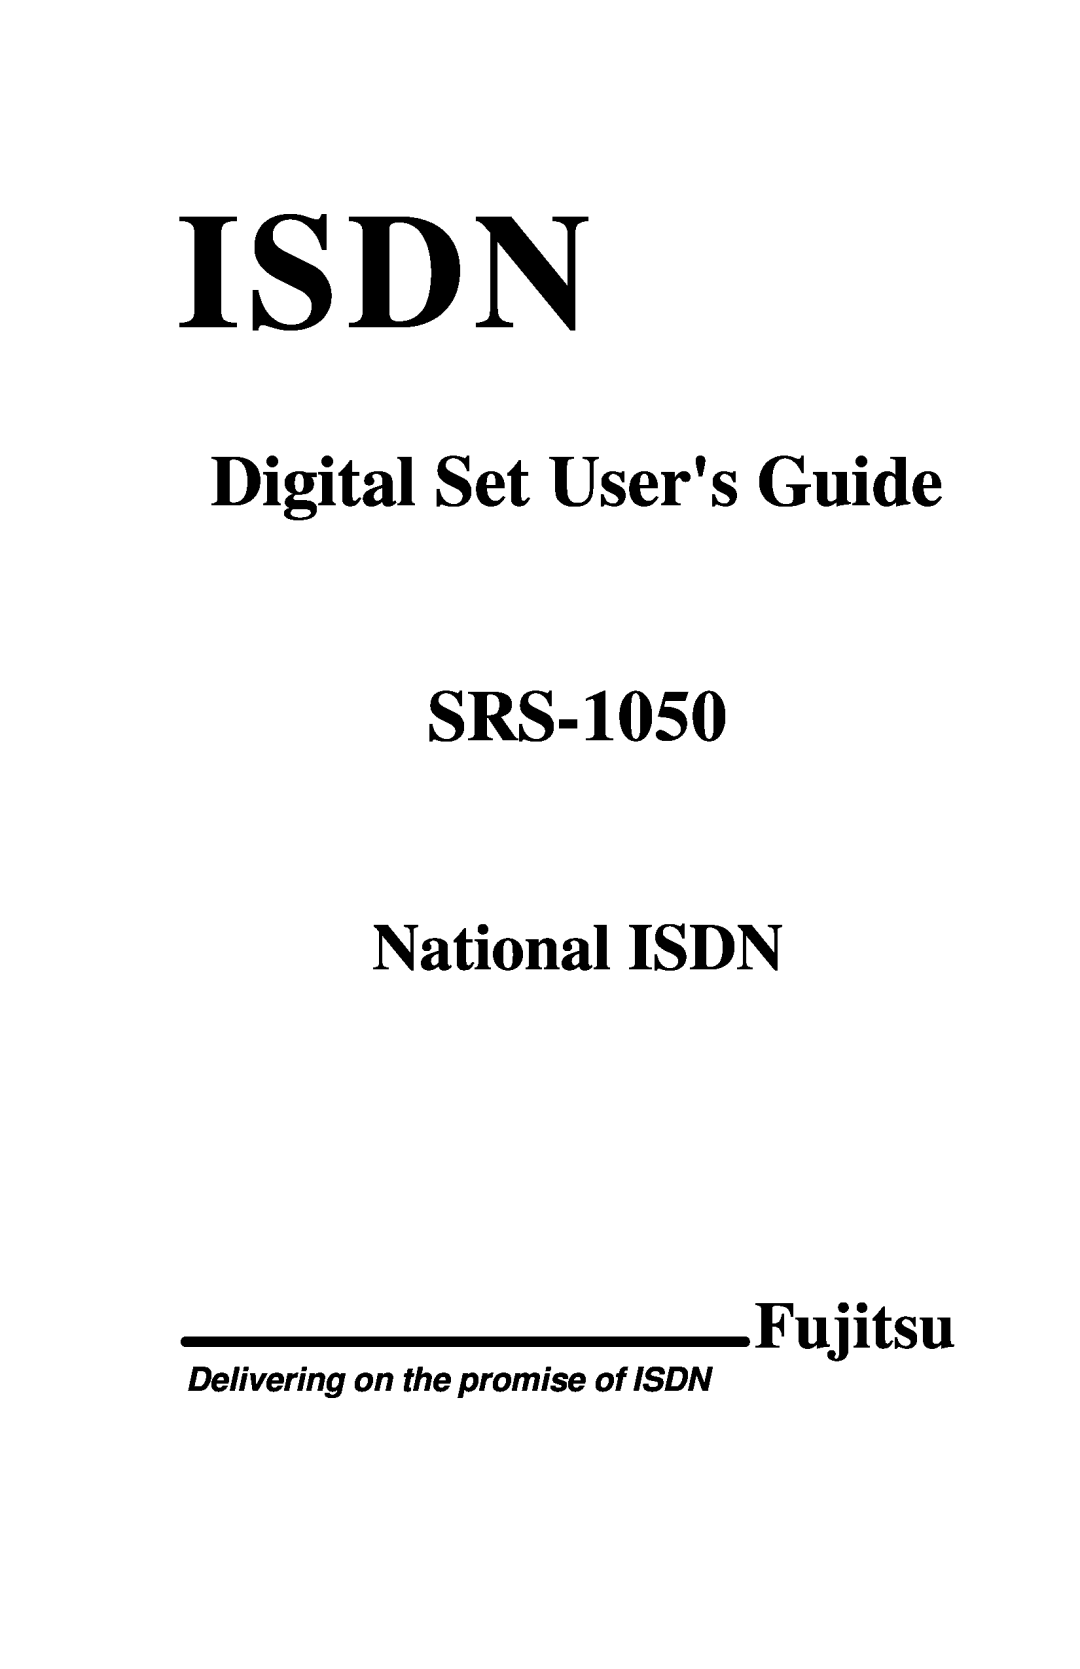 Fujitsu manual Isdn, Digital Set Users Guide SRS-1050, National ISDN Fujitsu, Delivering on the promise of ISDN 